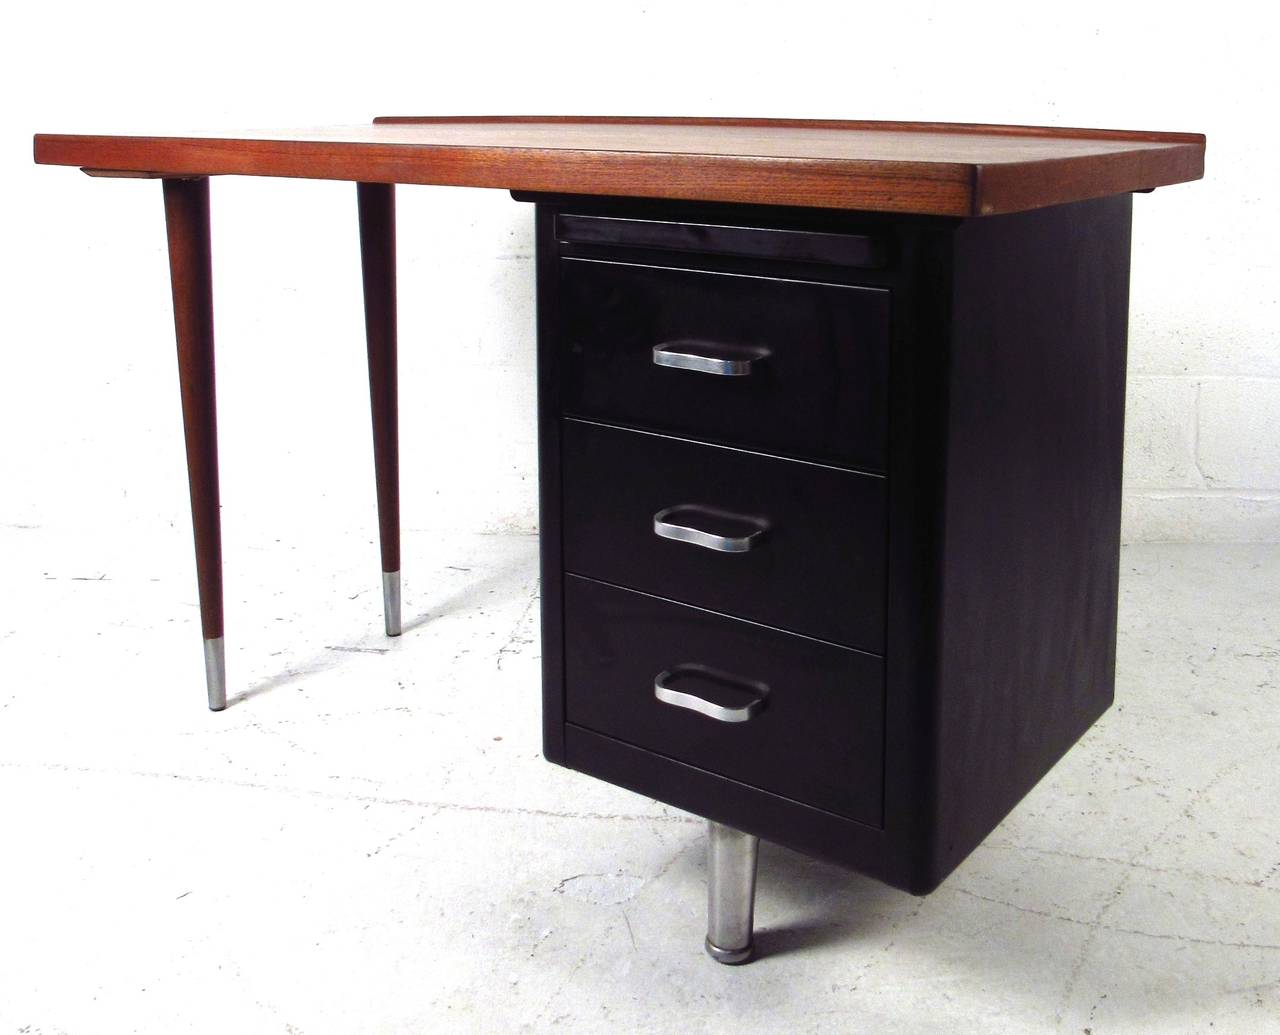 This stylish industrial modern writing desk features right-side three drawer design, Danish teak raised-edge top, and sturdy metal drawer storage. Petite dimensions make this an ideal desk for apartment or home office use. Unique Mid-Century Modern